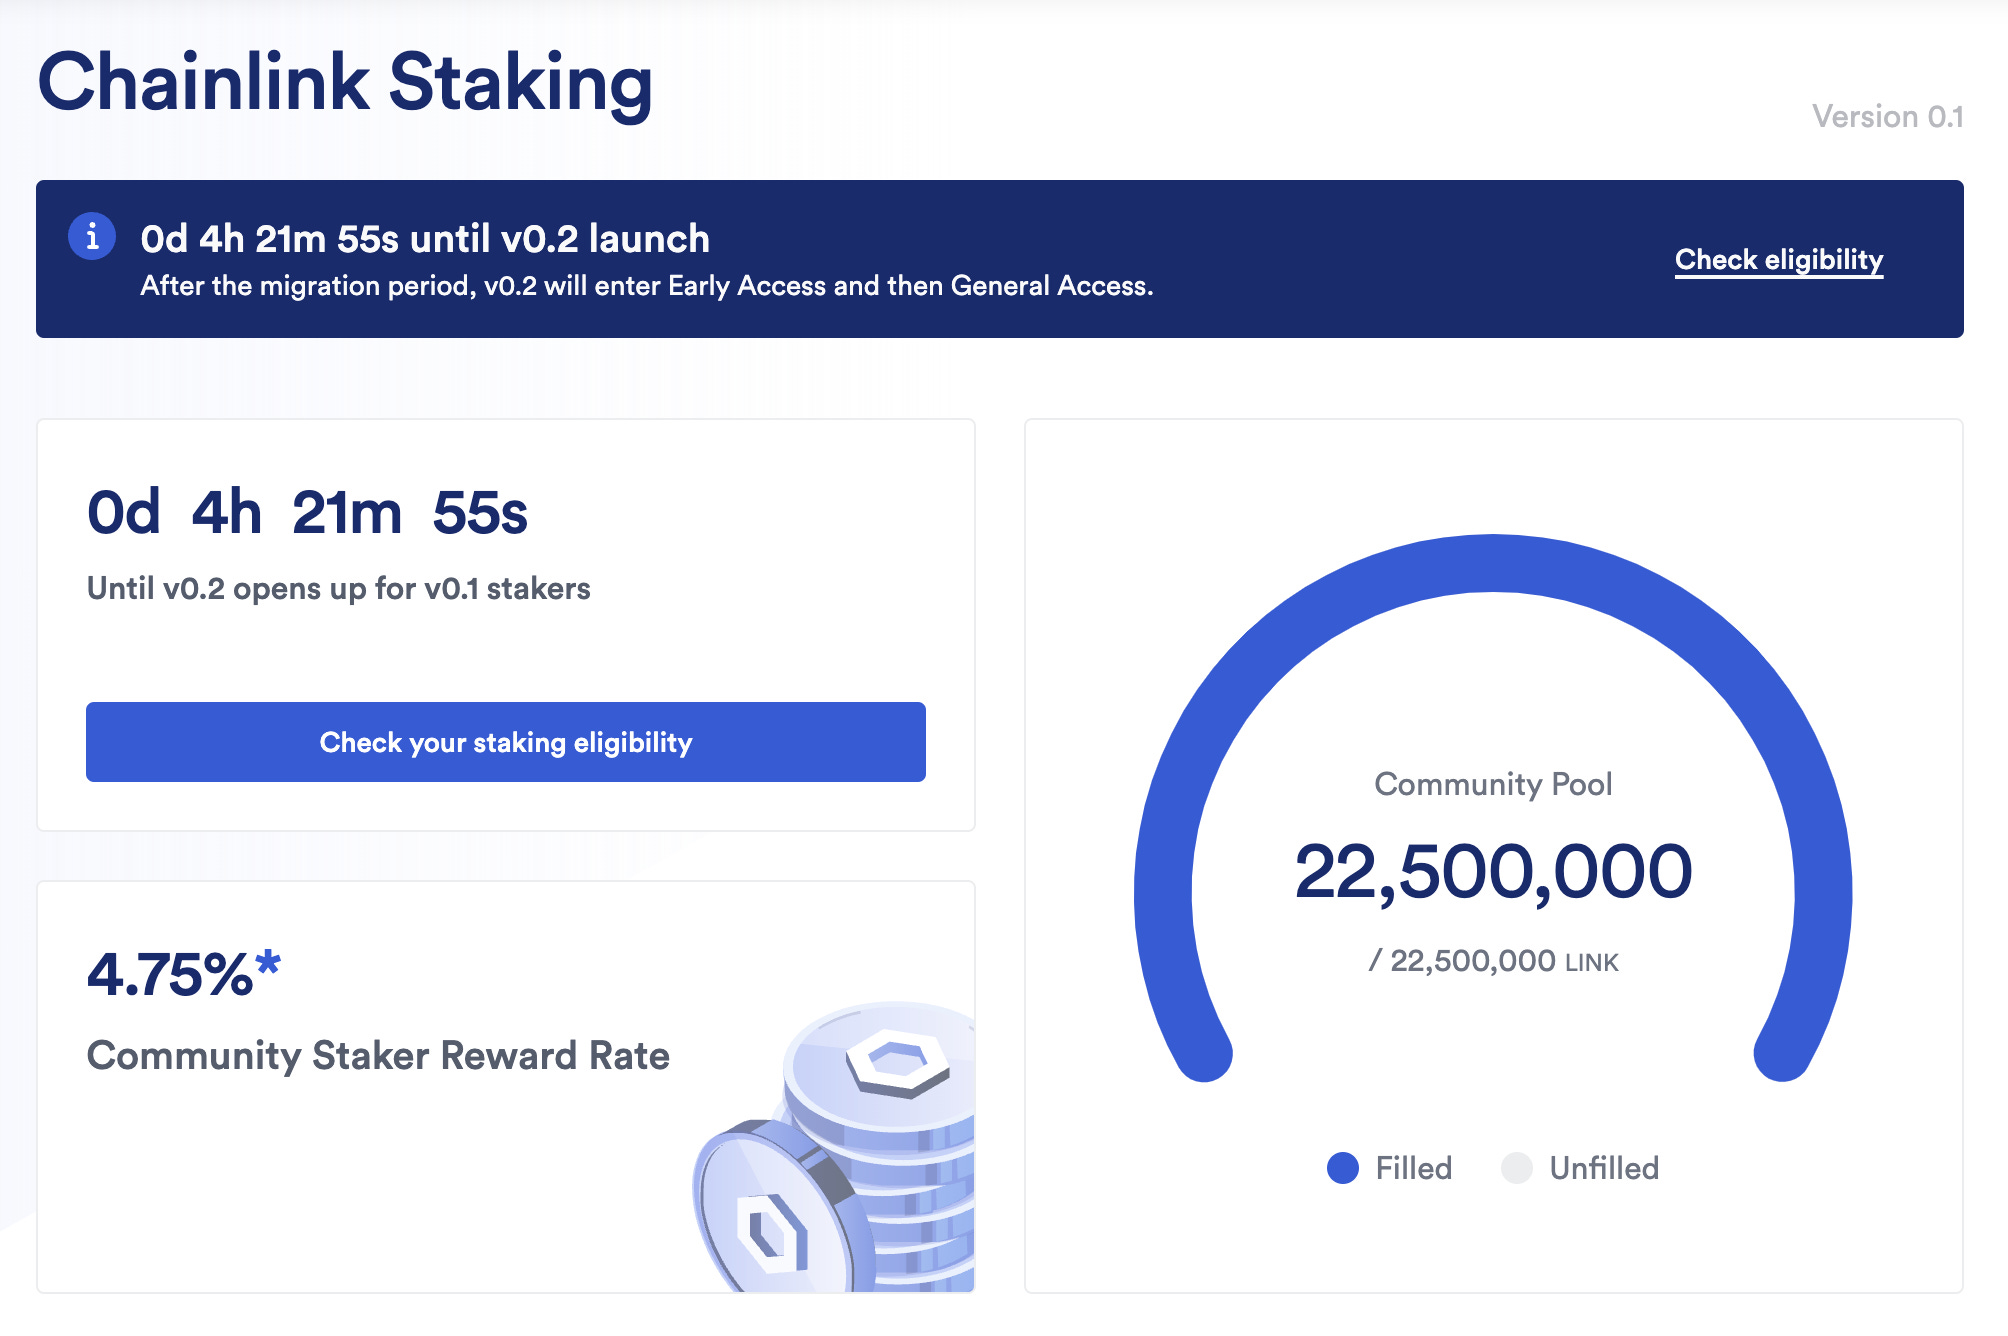 Staking | Chainlink